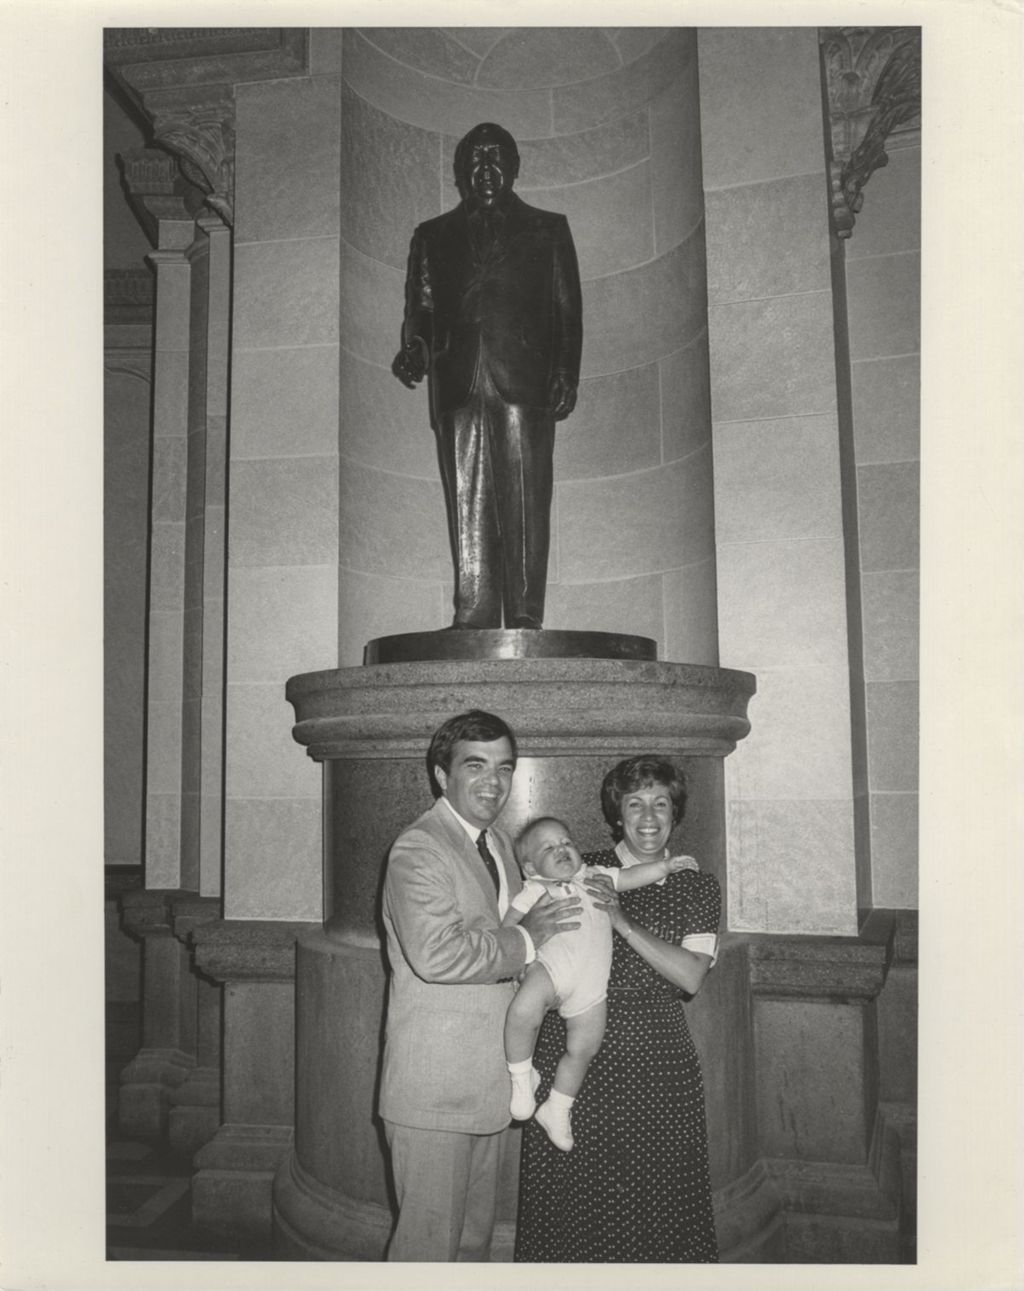 John, Mary Lou, and John Daley, Jr., in front of the Richard J. Daley statue